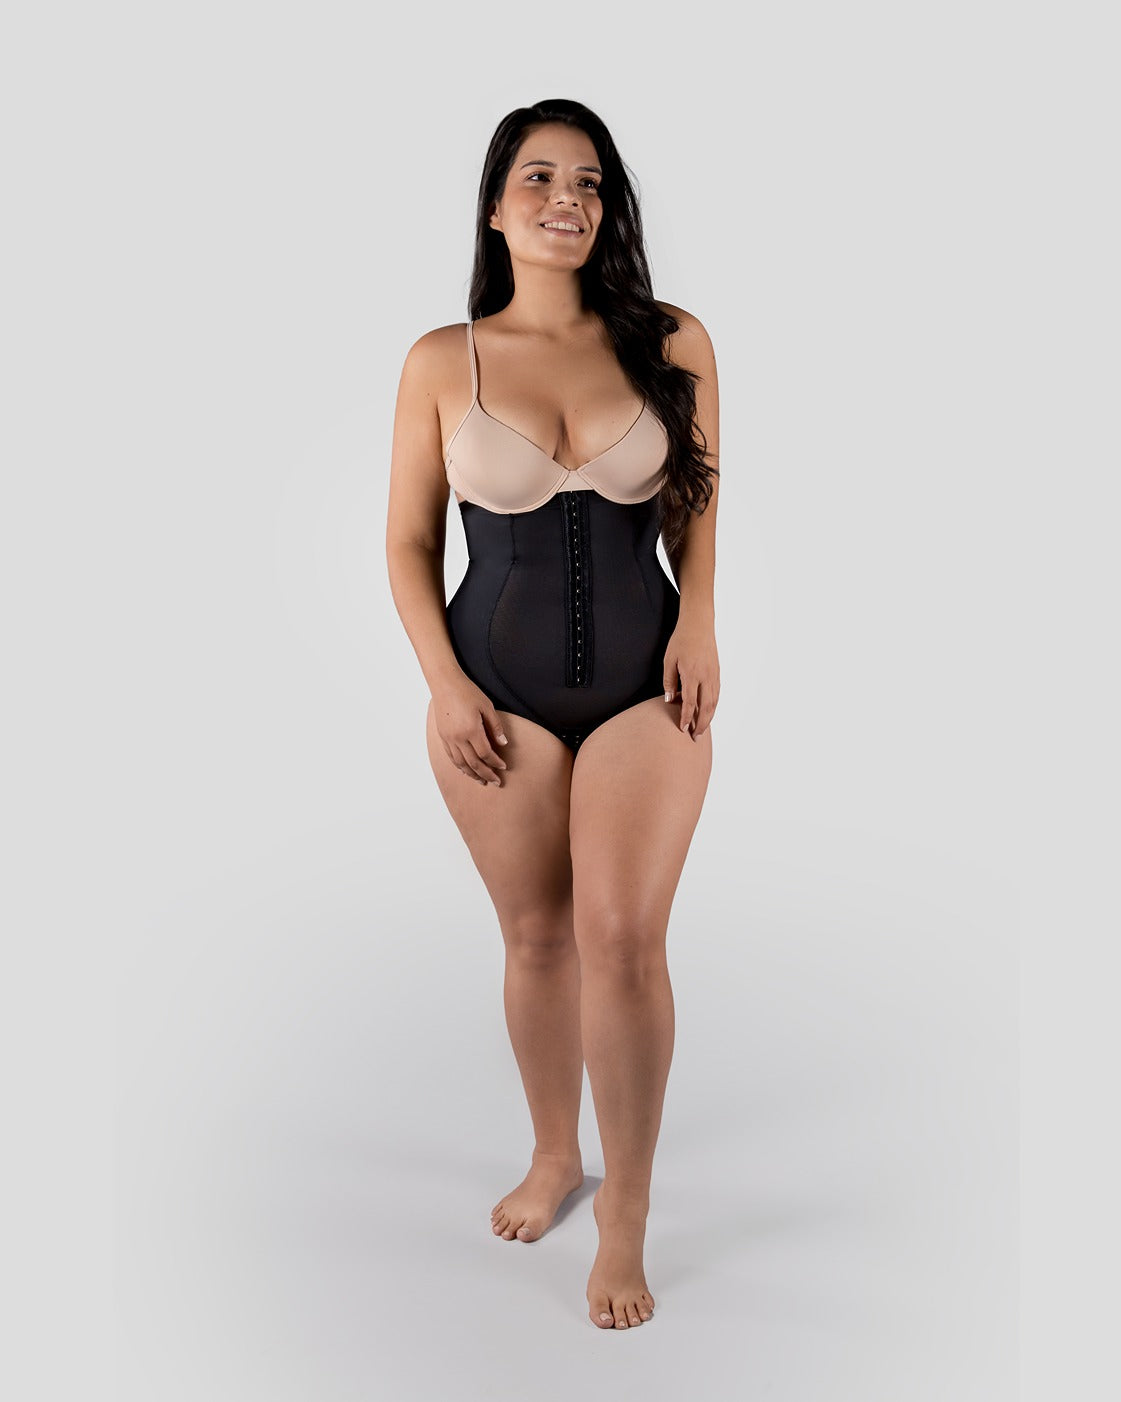 Phase 1 Girdle Targeted Core Compression Postpartum Recovery